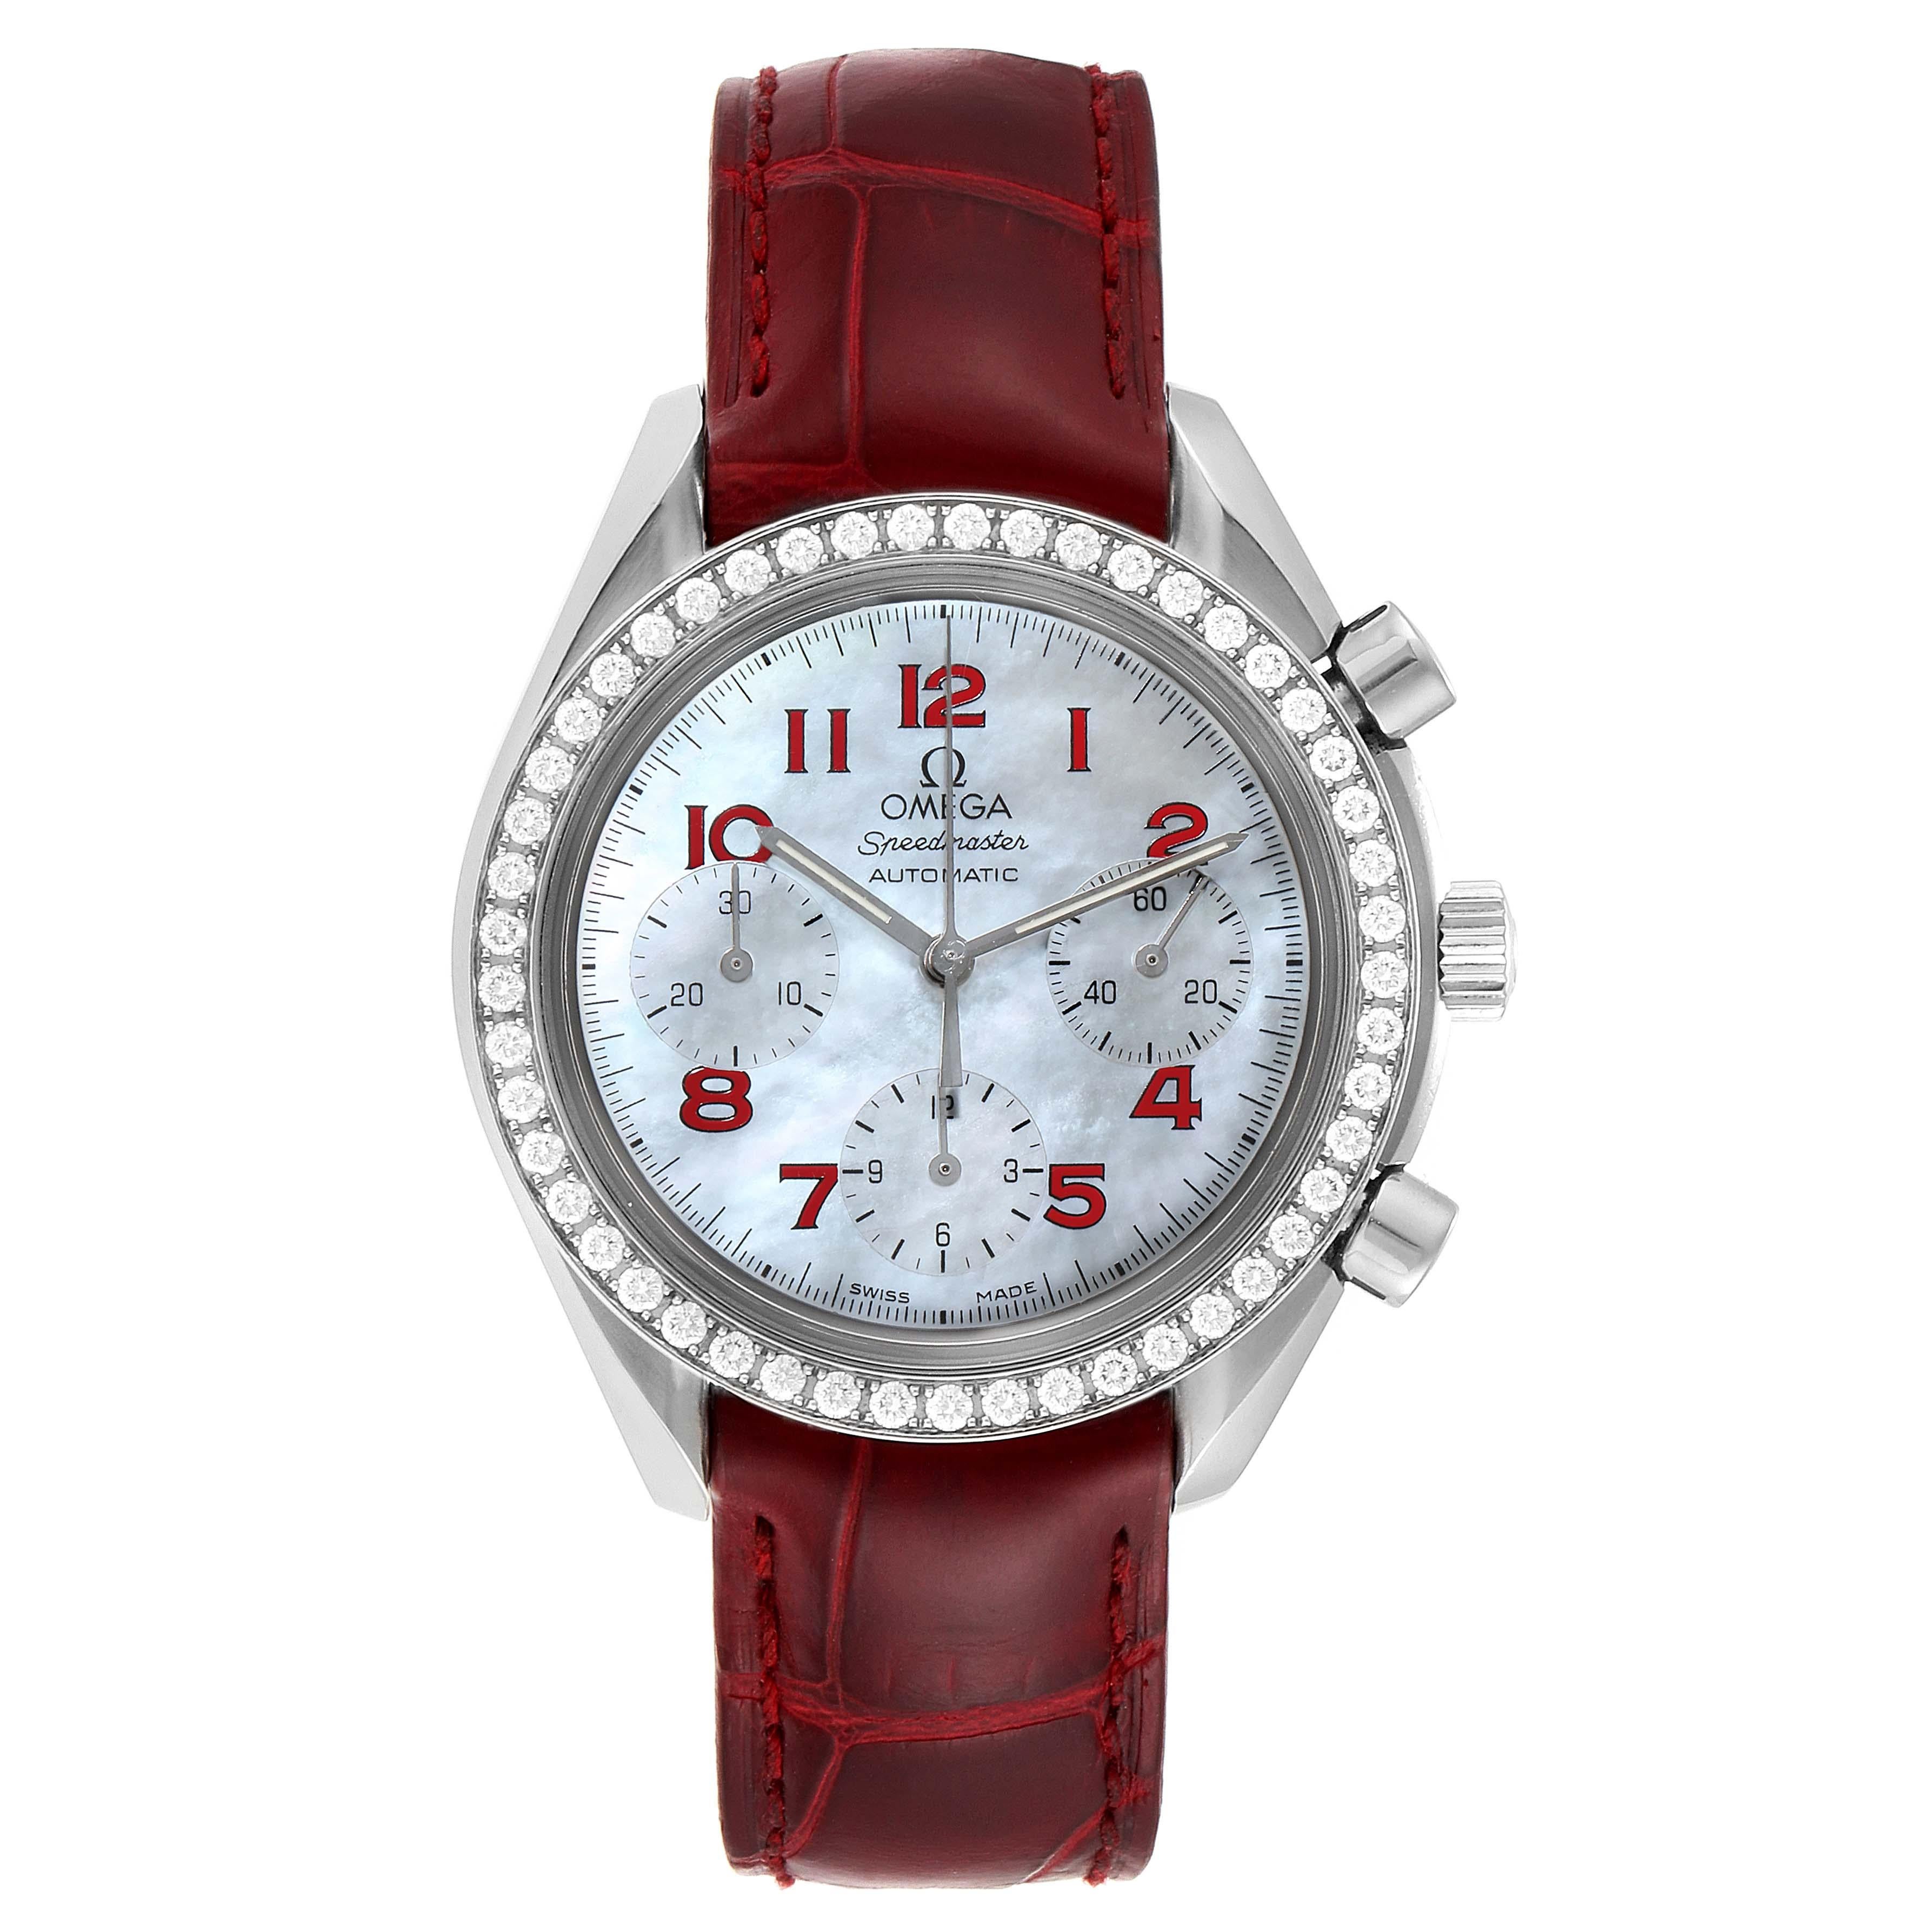 Omega Speedmaster MOP Diamond Red Strap Ladies Watch 3815.79.40. Automatic self-winding chronograph movement. Stainless steel round case 35.5 mm in diameter. Original Omega factory diamond bezel. Scratch-resistant sapphire crystal with